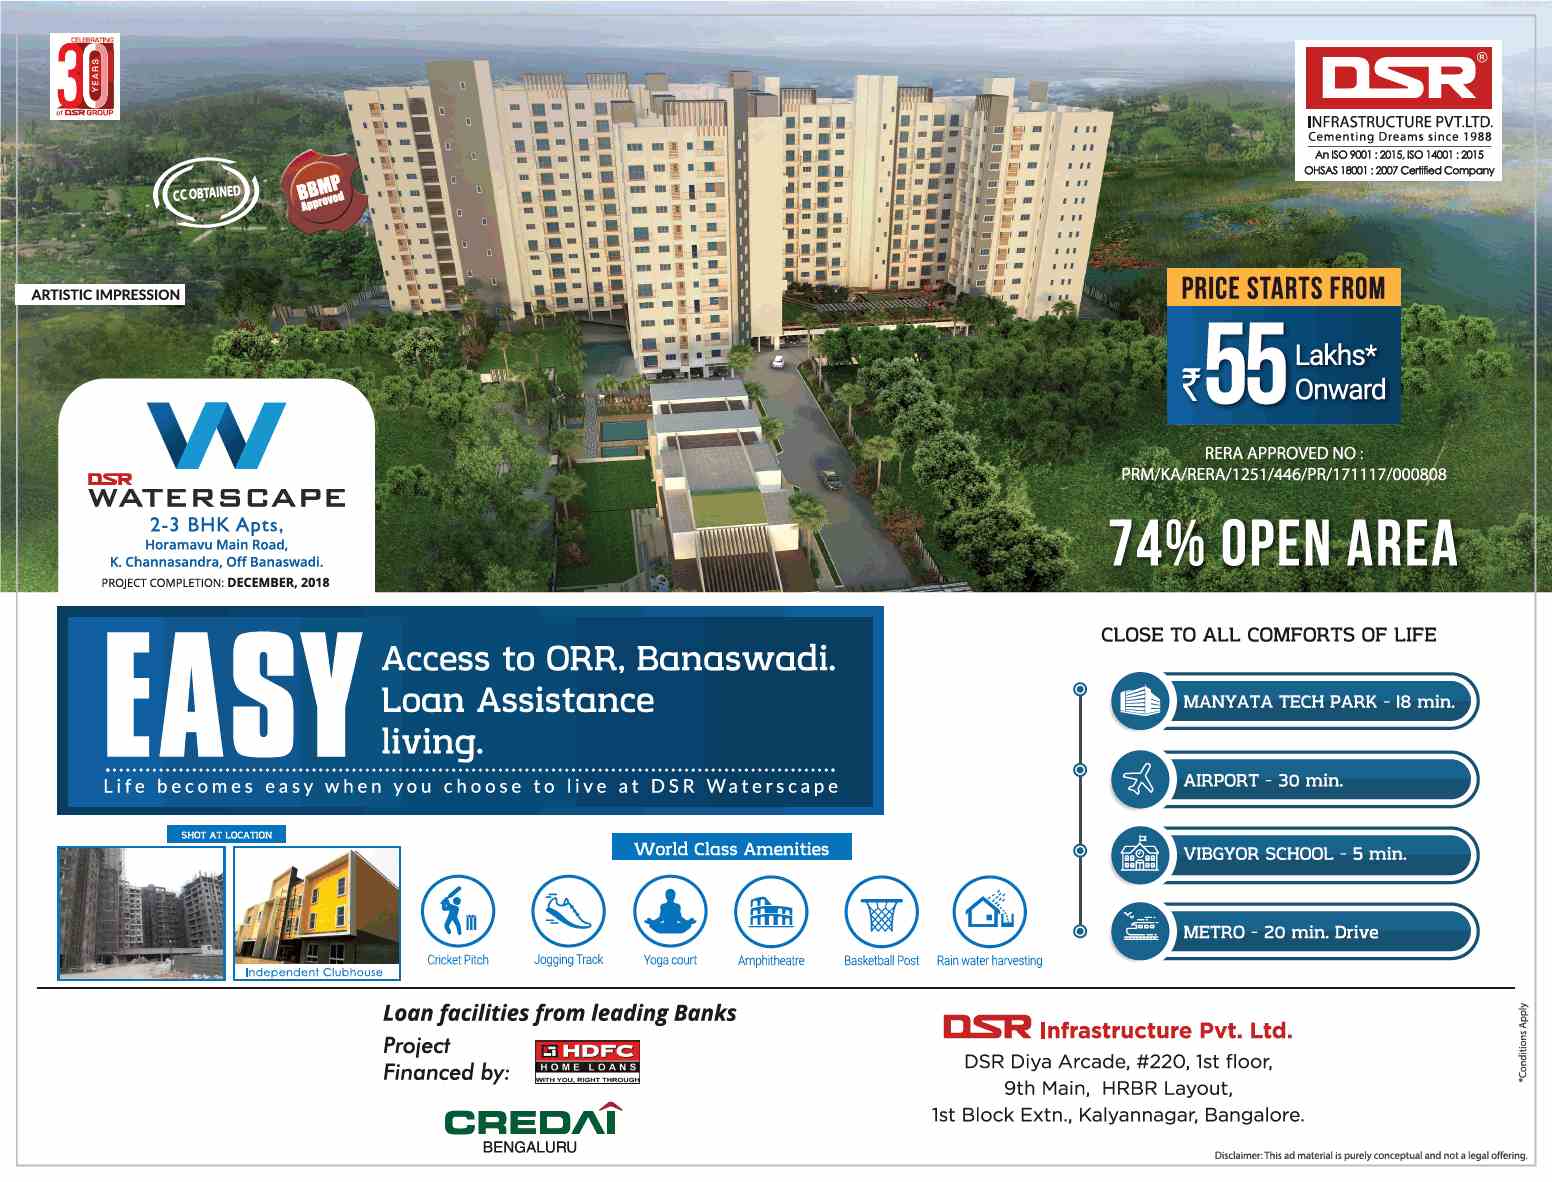 Book 2 & 3 BHK apartments @ Rs. 55 Lacs at DSR Waterscape in Bangalore